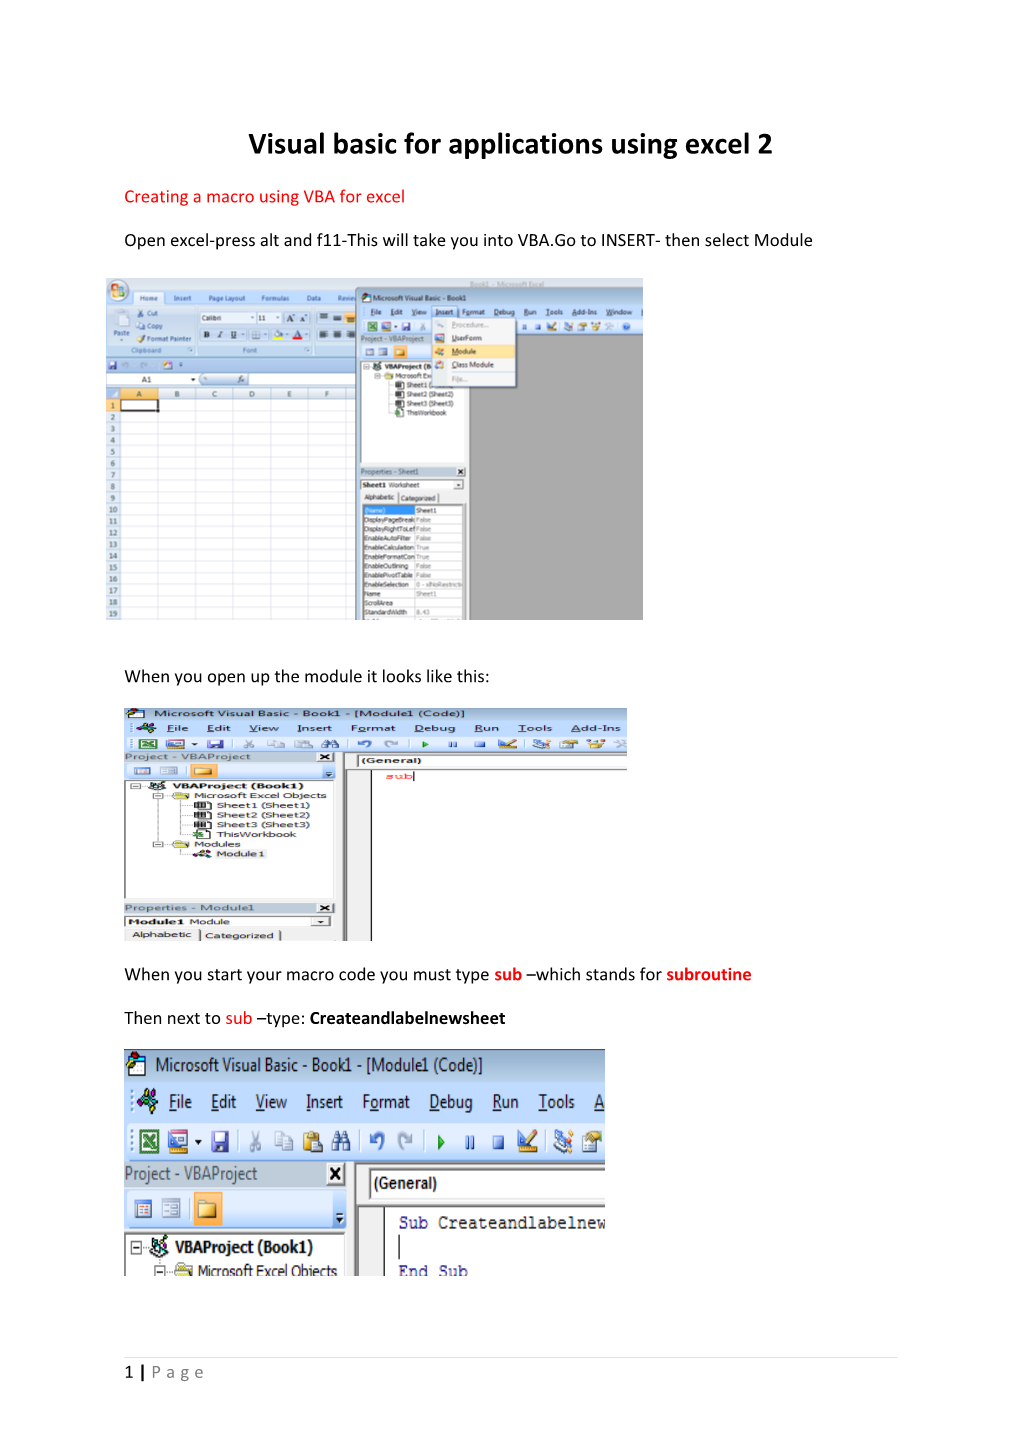 Visual Basic for Applications Using Excel 2